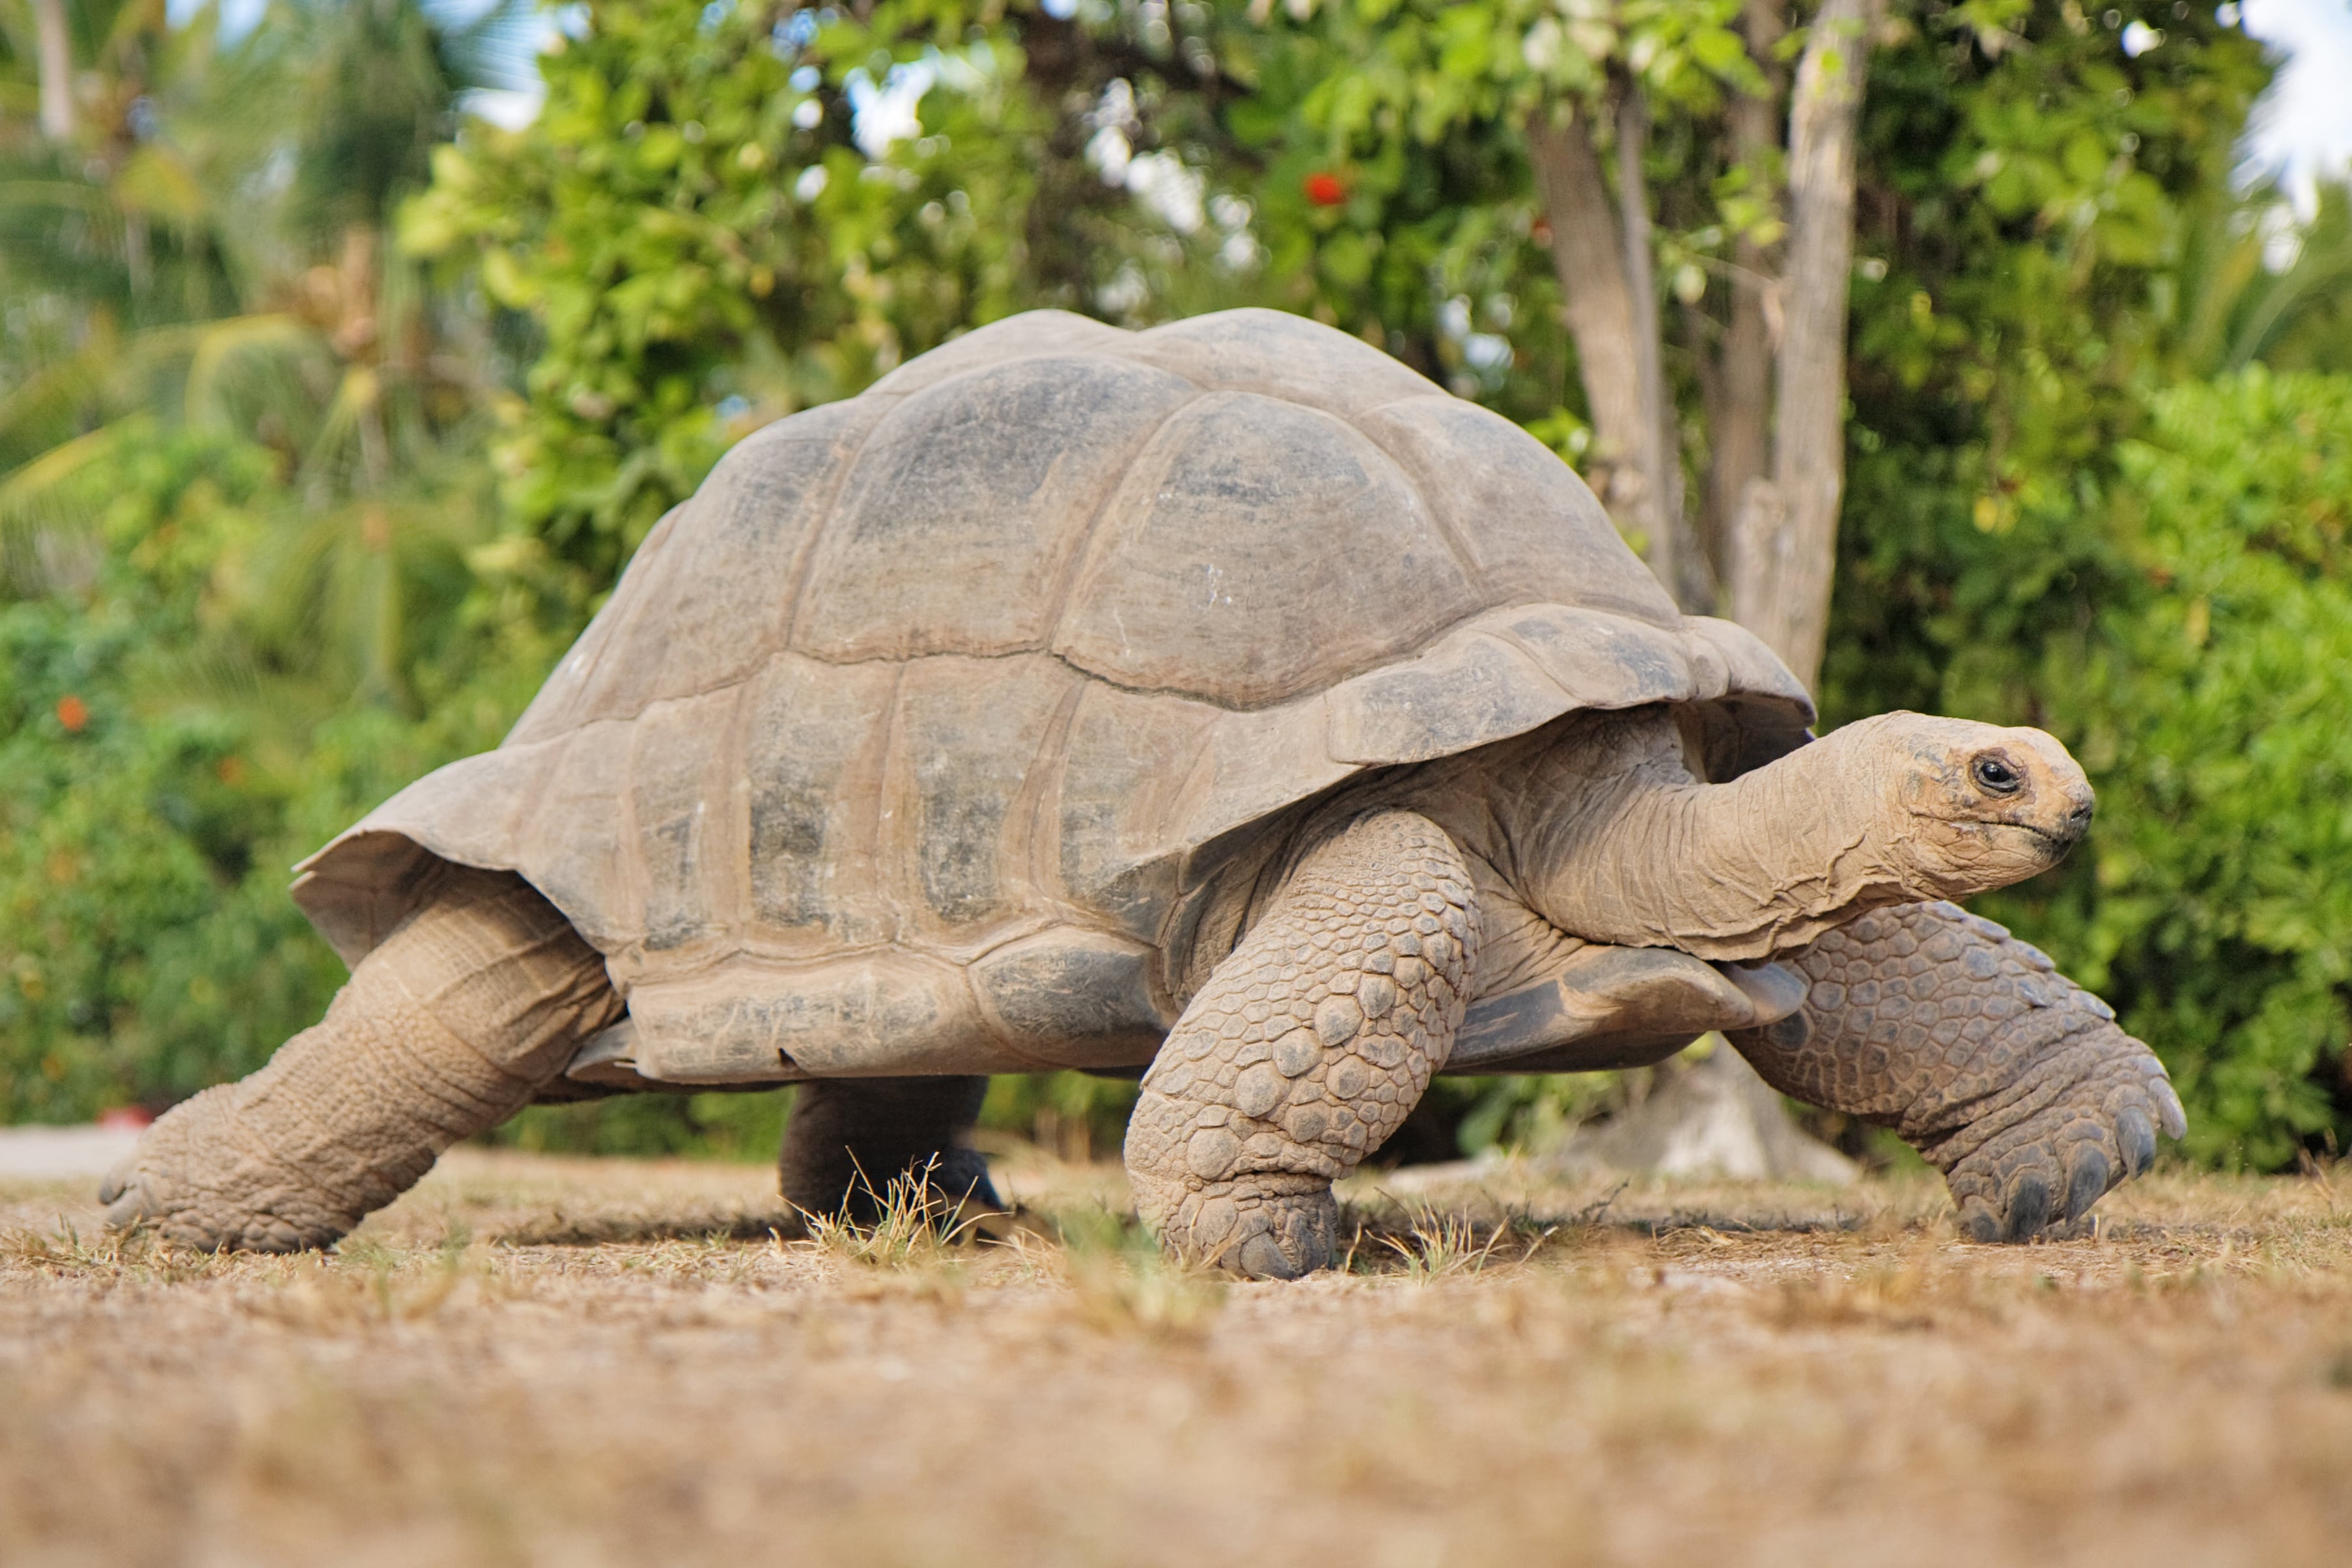 20 unmissable attractions in Seychelles - meet the worlds largest tortoise